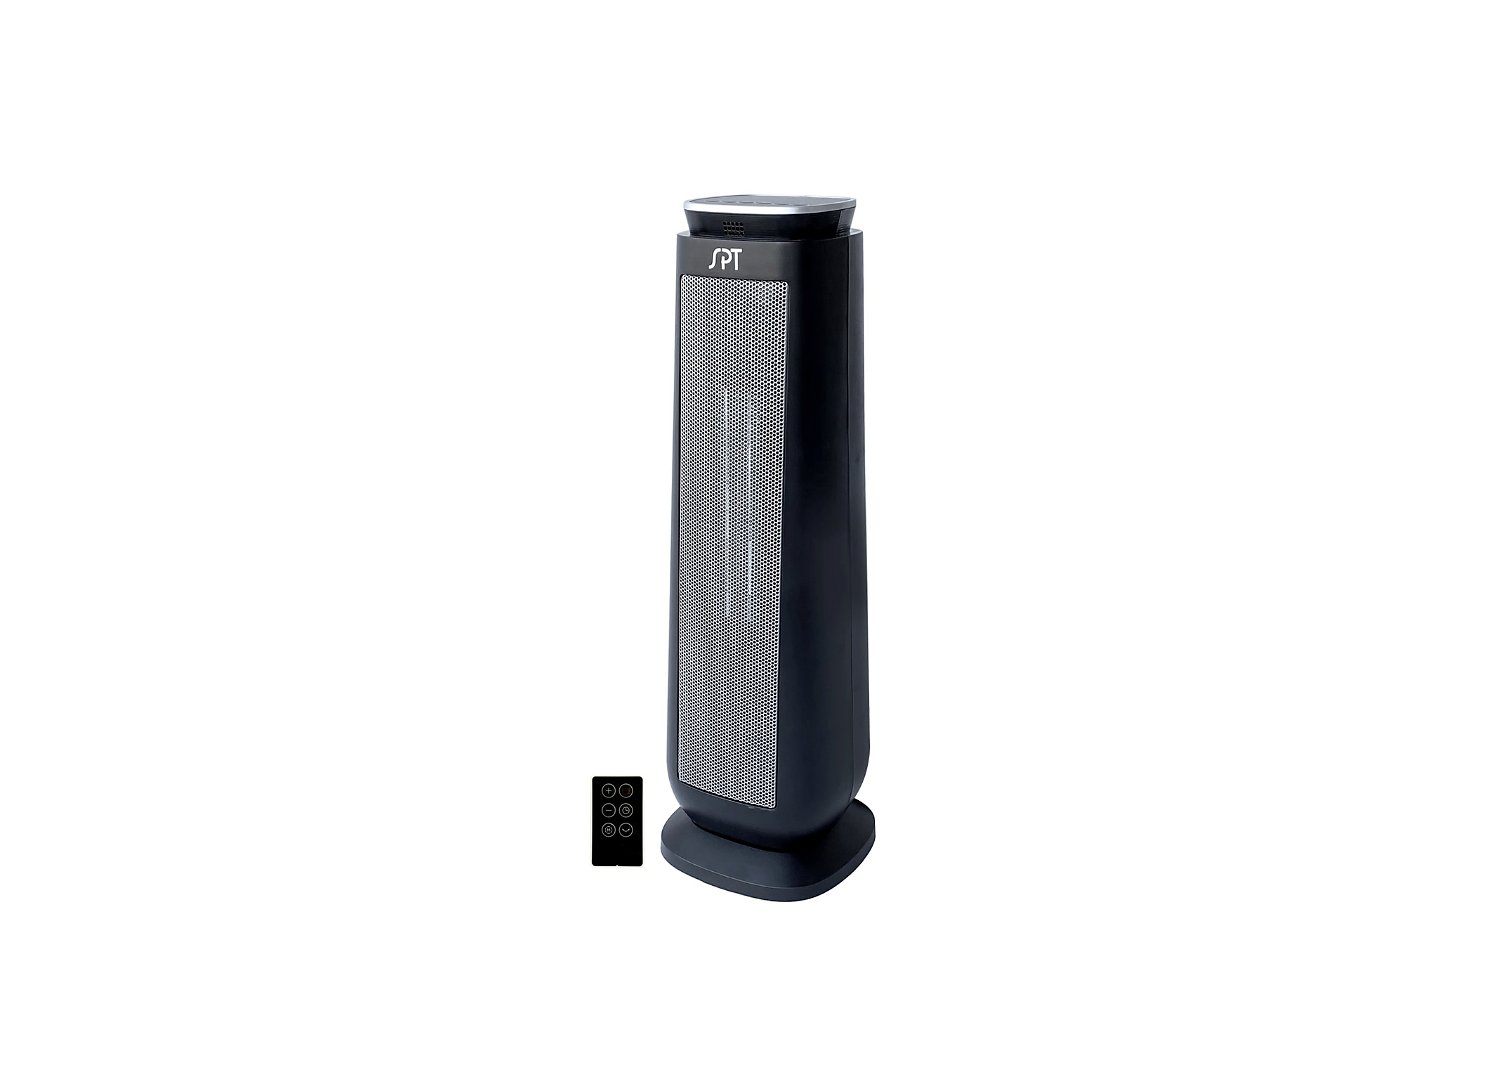 SPT Tower Ceramic Heater With Remote Control